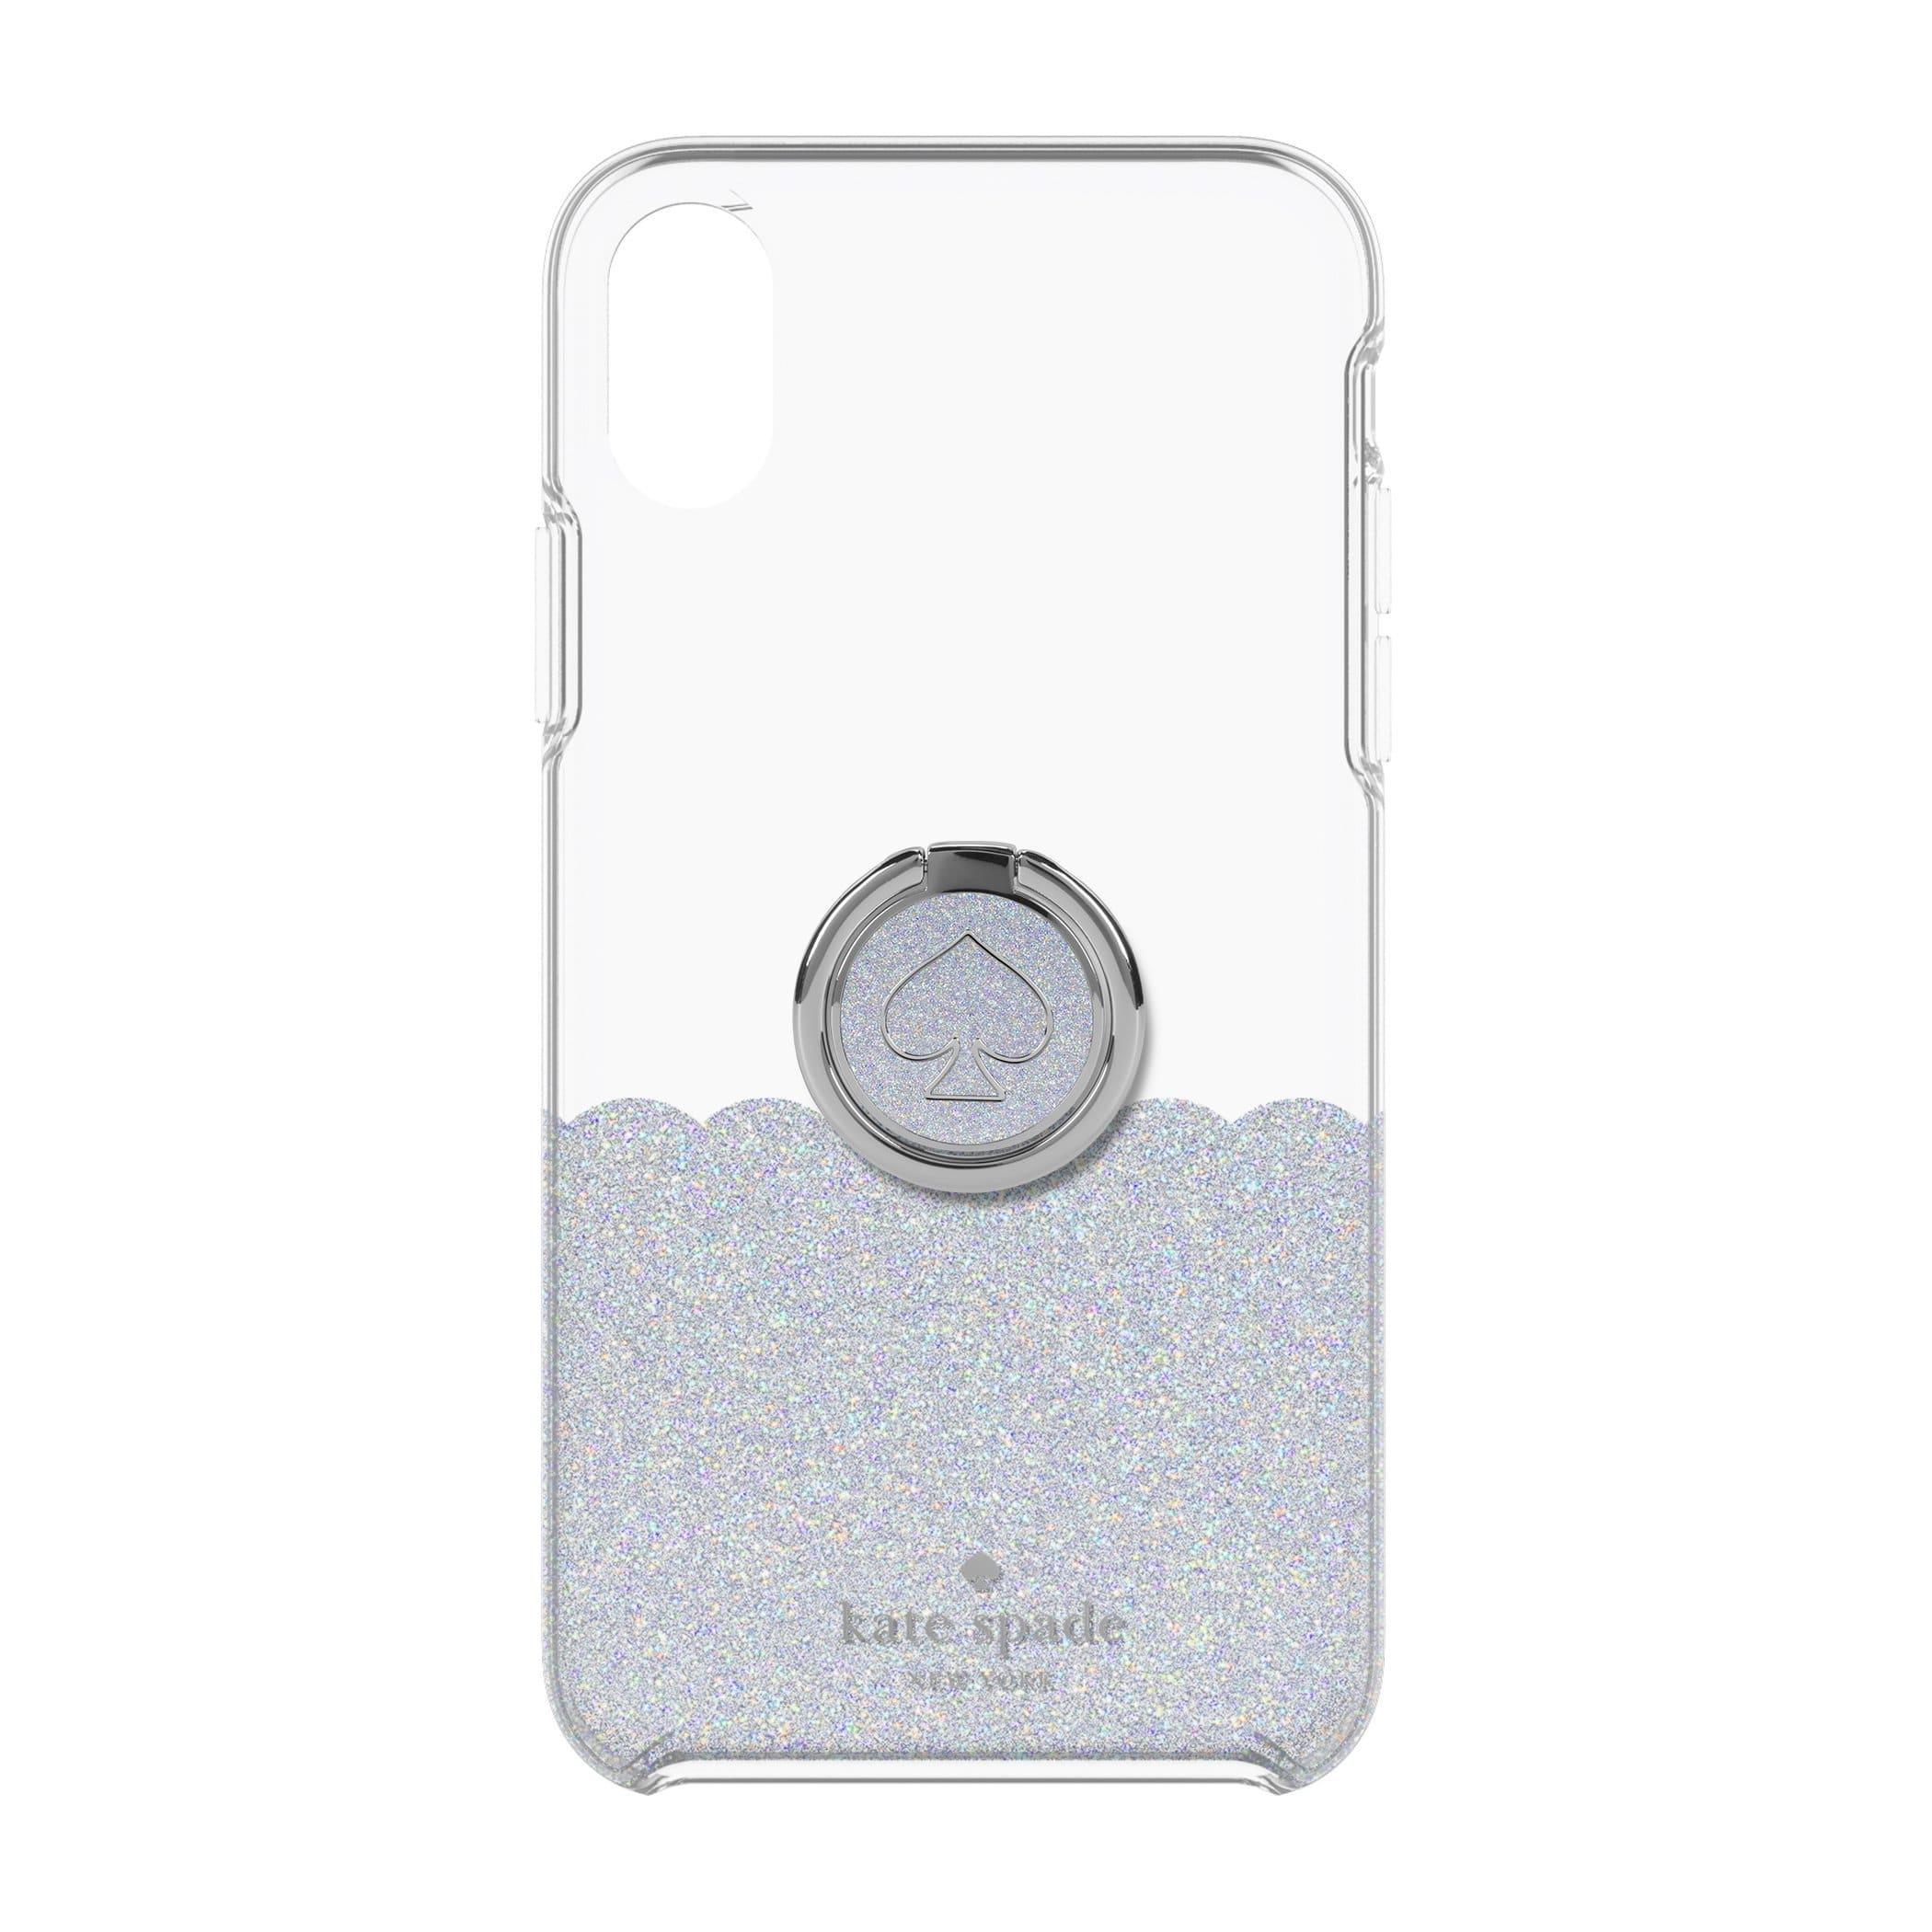 kate spade new york iphone xs max gift set ring stand protective hardshell case scallop mermaid glitter clear